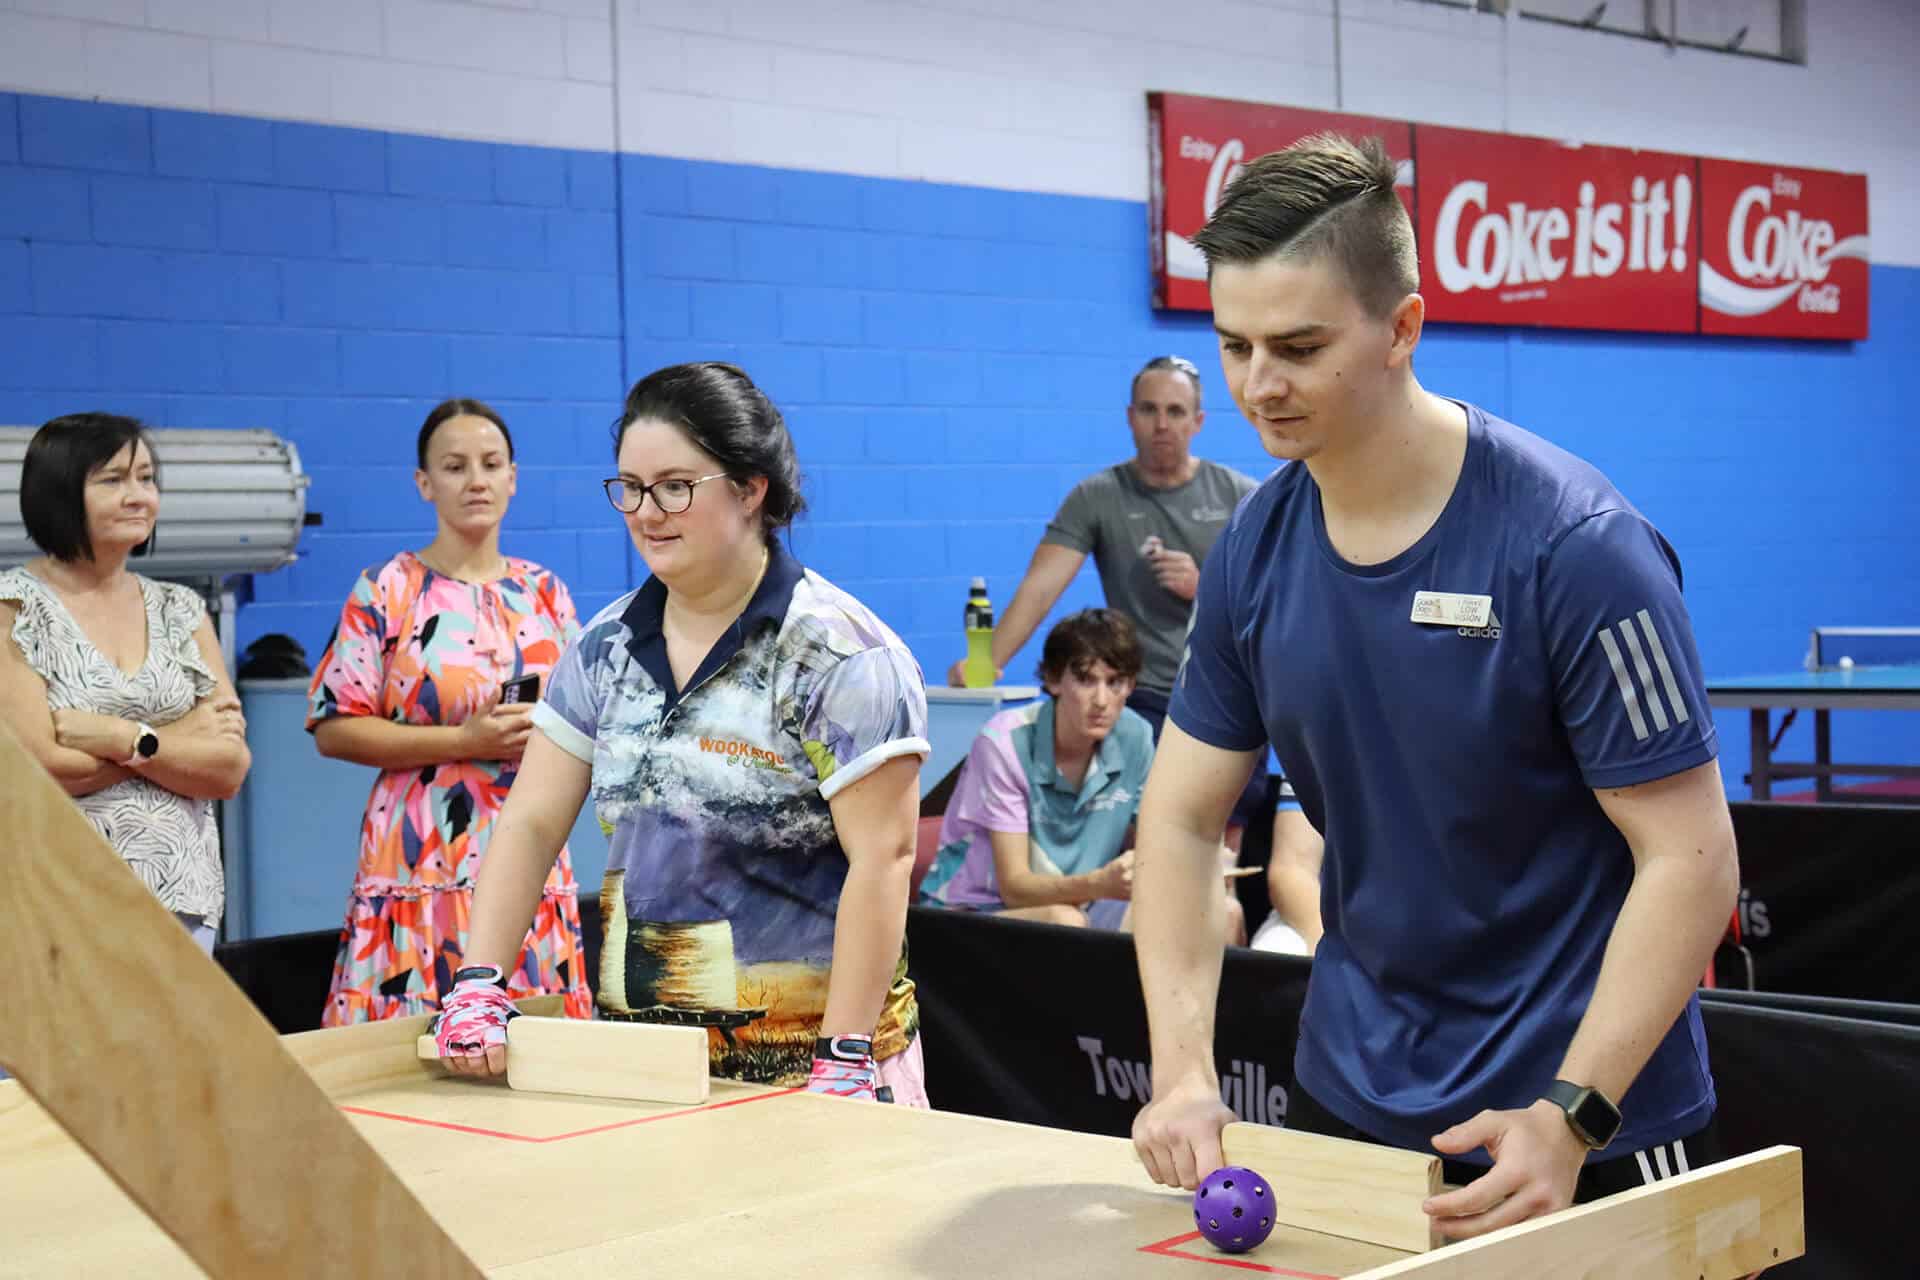 2 people playing a game of modified table tennis for vision impaired people, known as Swish.